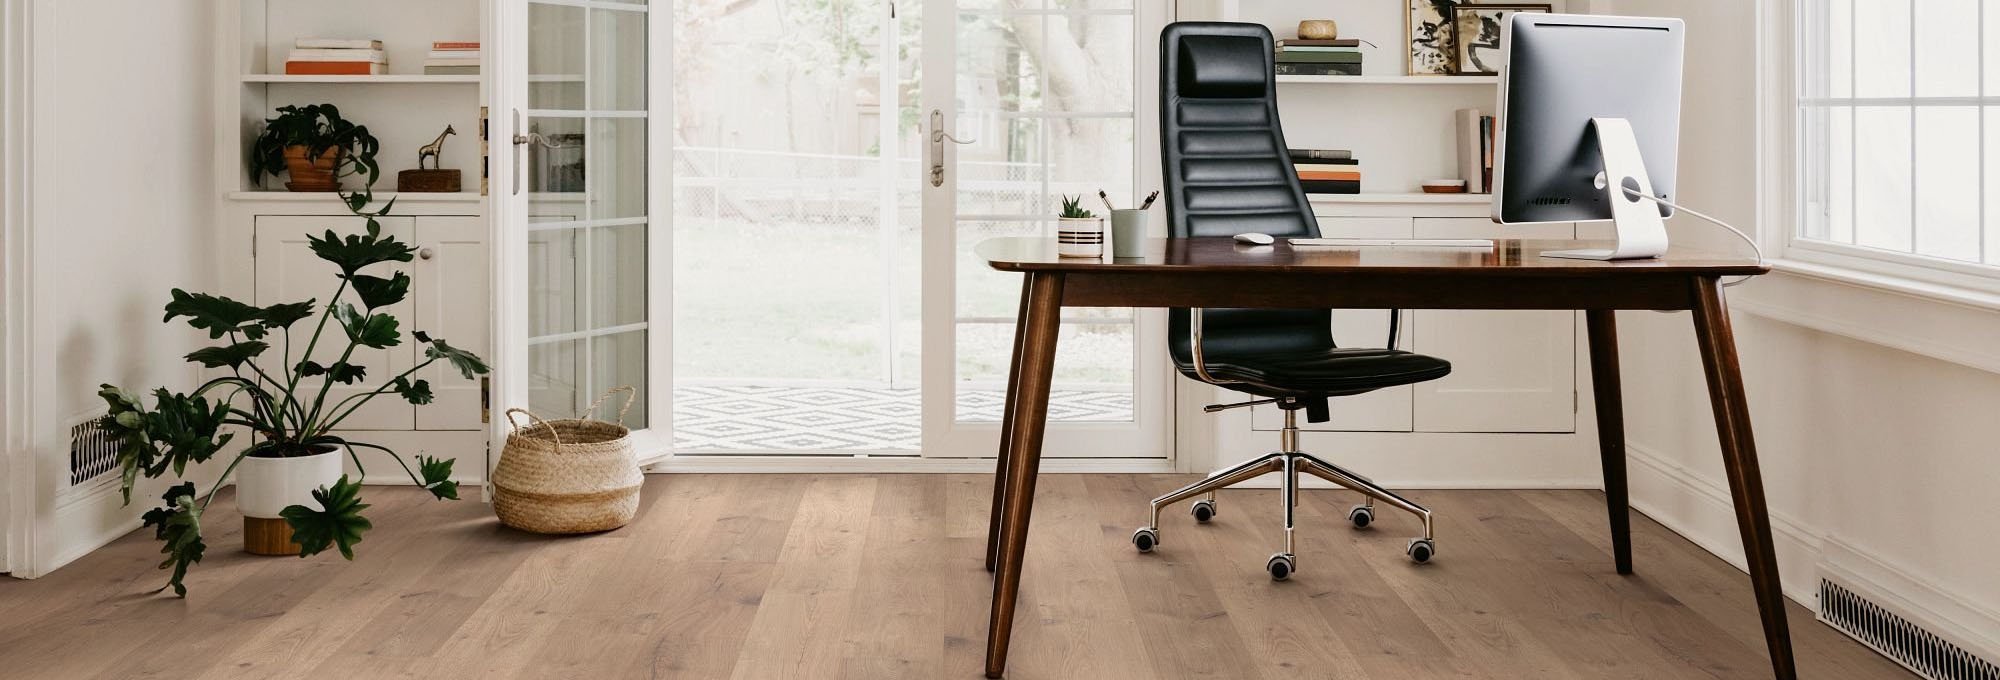 Home office with wood-look laminate flooring from Rugtex of Florida in Miami, FL